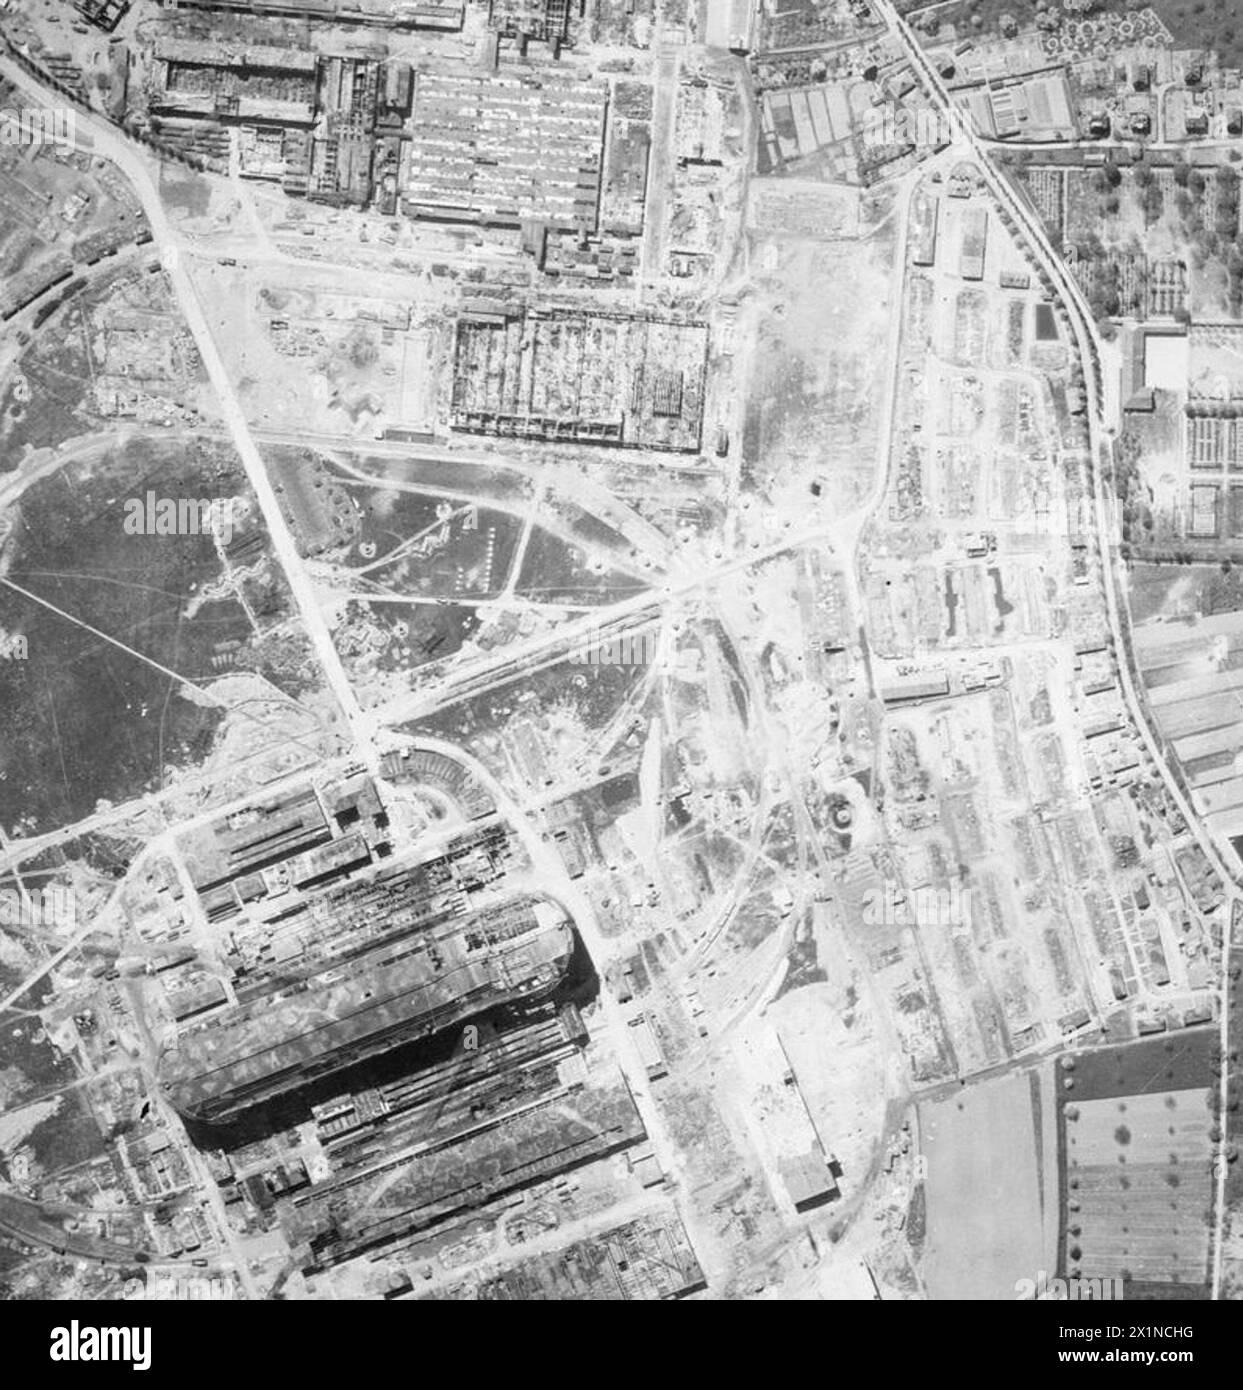 ROYAL AIR FORCE: OPERATIONS BY THE PHOTOGRAPHIC RECONNAISSANCE UNITS, 1939-1945. - Vertical photographic-reconnaissance aerial taken over Friedrichshafen, Germany, following the raid by 322 aircraft of Bomber Command on the night of 27/28 April 1944. Several large buildings have been destroyed in the Maybach Motorenbau GmBH engine factory (top). There is also severe damage to buildings of the Luftshiffbau Zeppelin, including the giant airship hangar (lower left), and group of 60 huts adjacent to this plant are two-thirds destroyed (middle right). This was an outstandingly successful attack, la Stock Photo